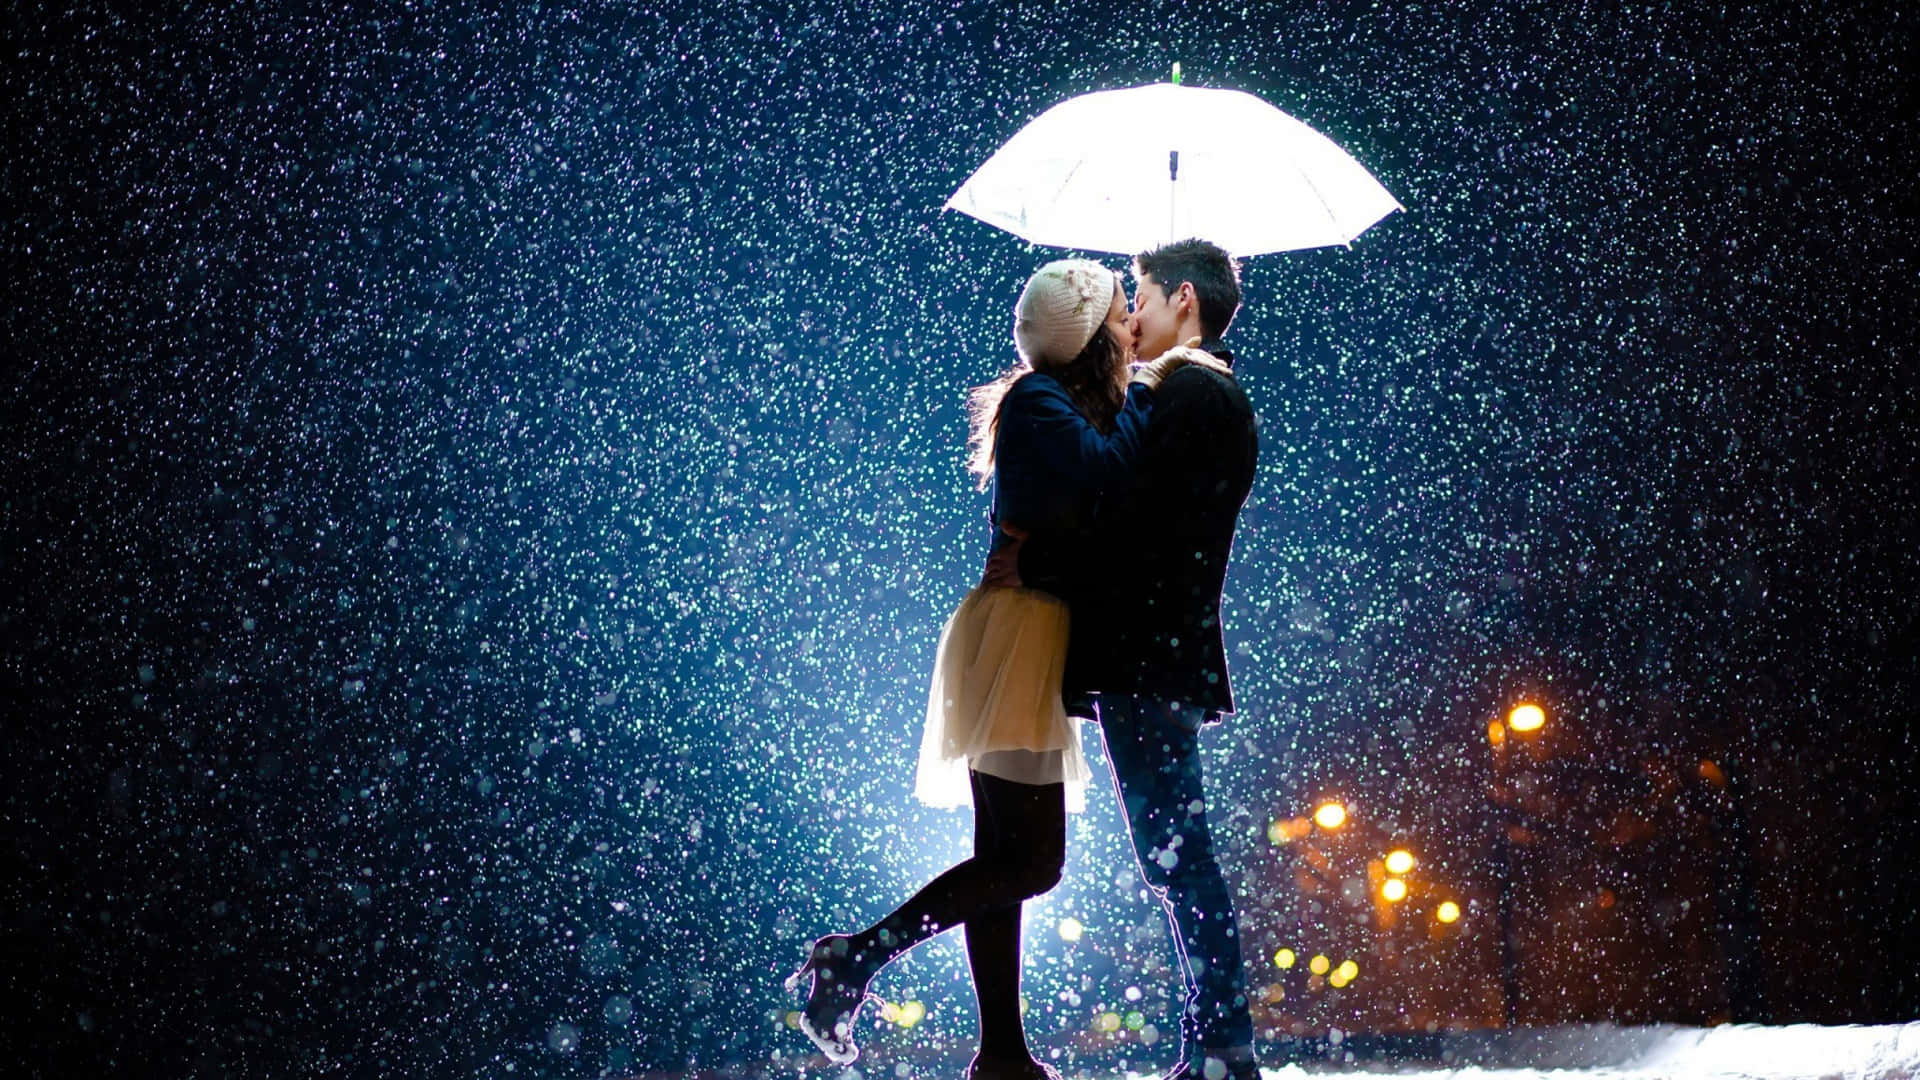 Couple Kissing With White Umbrella Picture